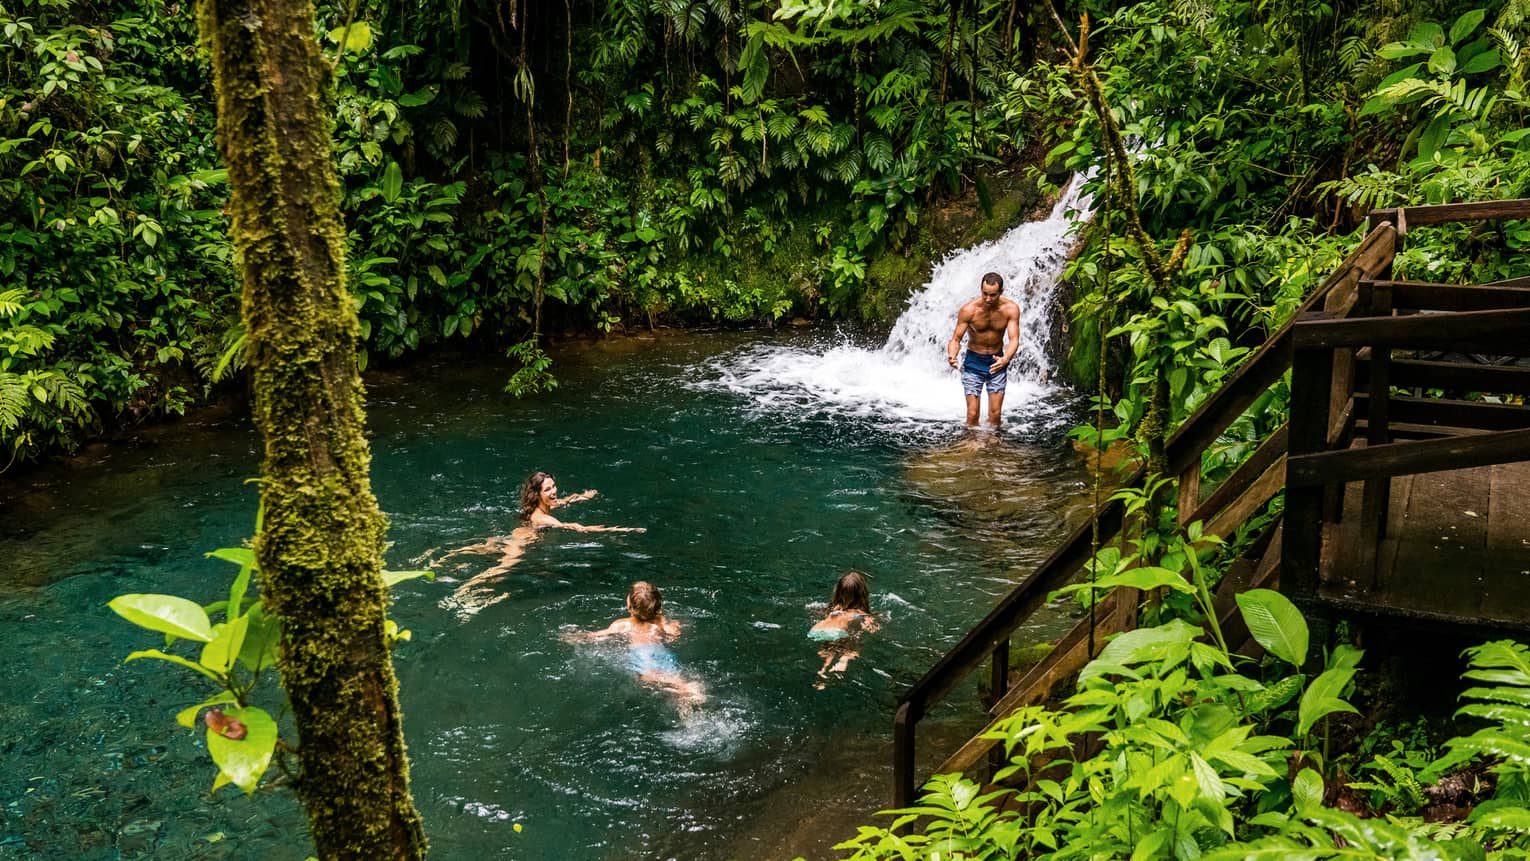 Two adults and two kids frolic at the foot of a waterfall surrounded by lush jungle greenery